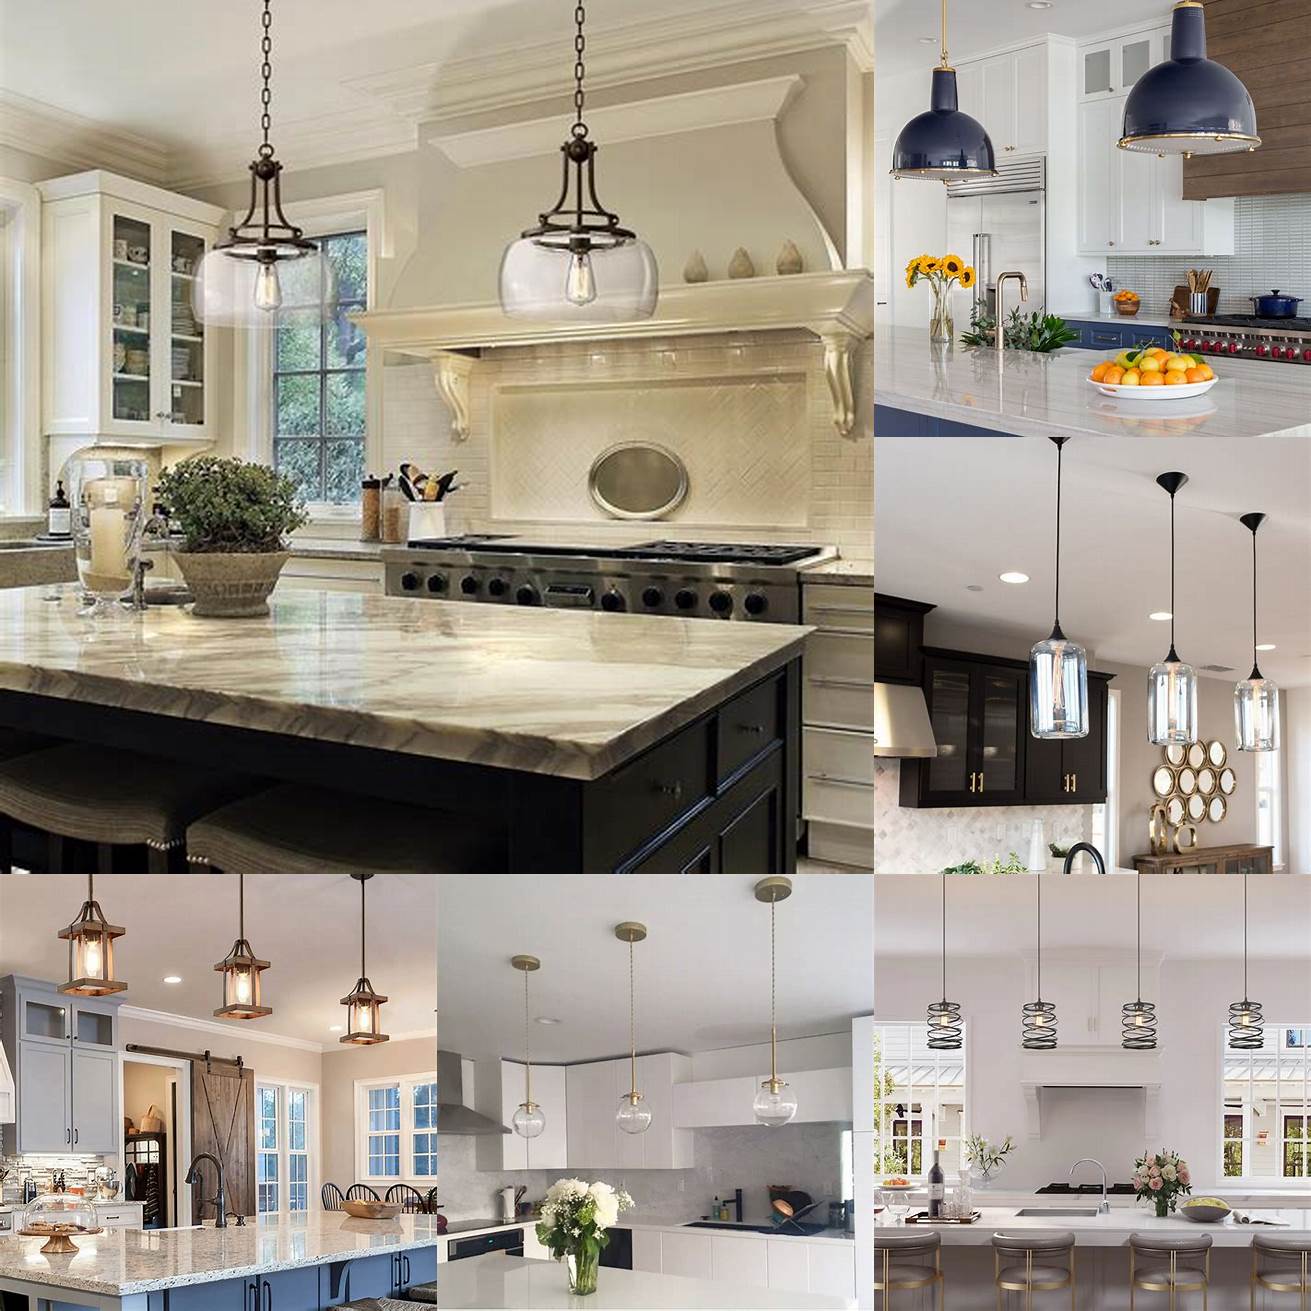 In the kitchen Install a row of pendant lights with clear glass shades above the kitchen island or countertop for a functional and stylish lighting solution